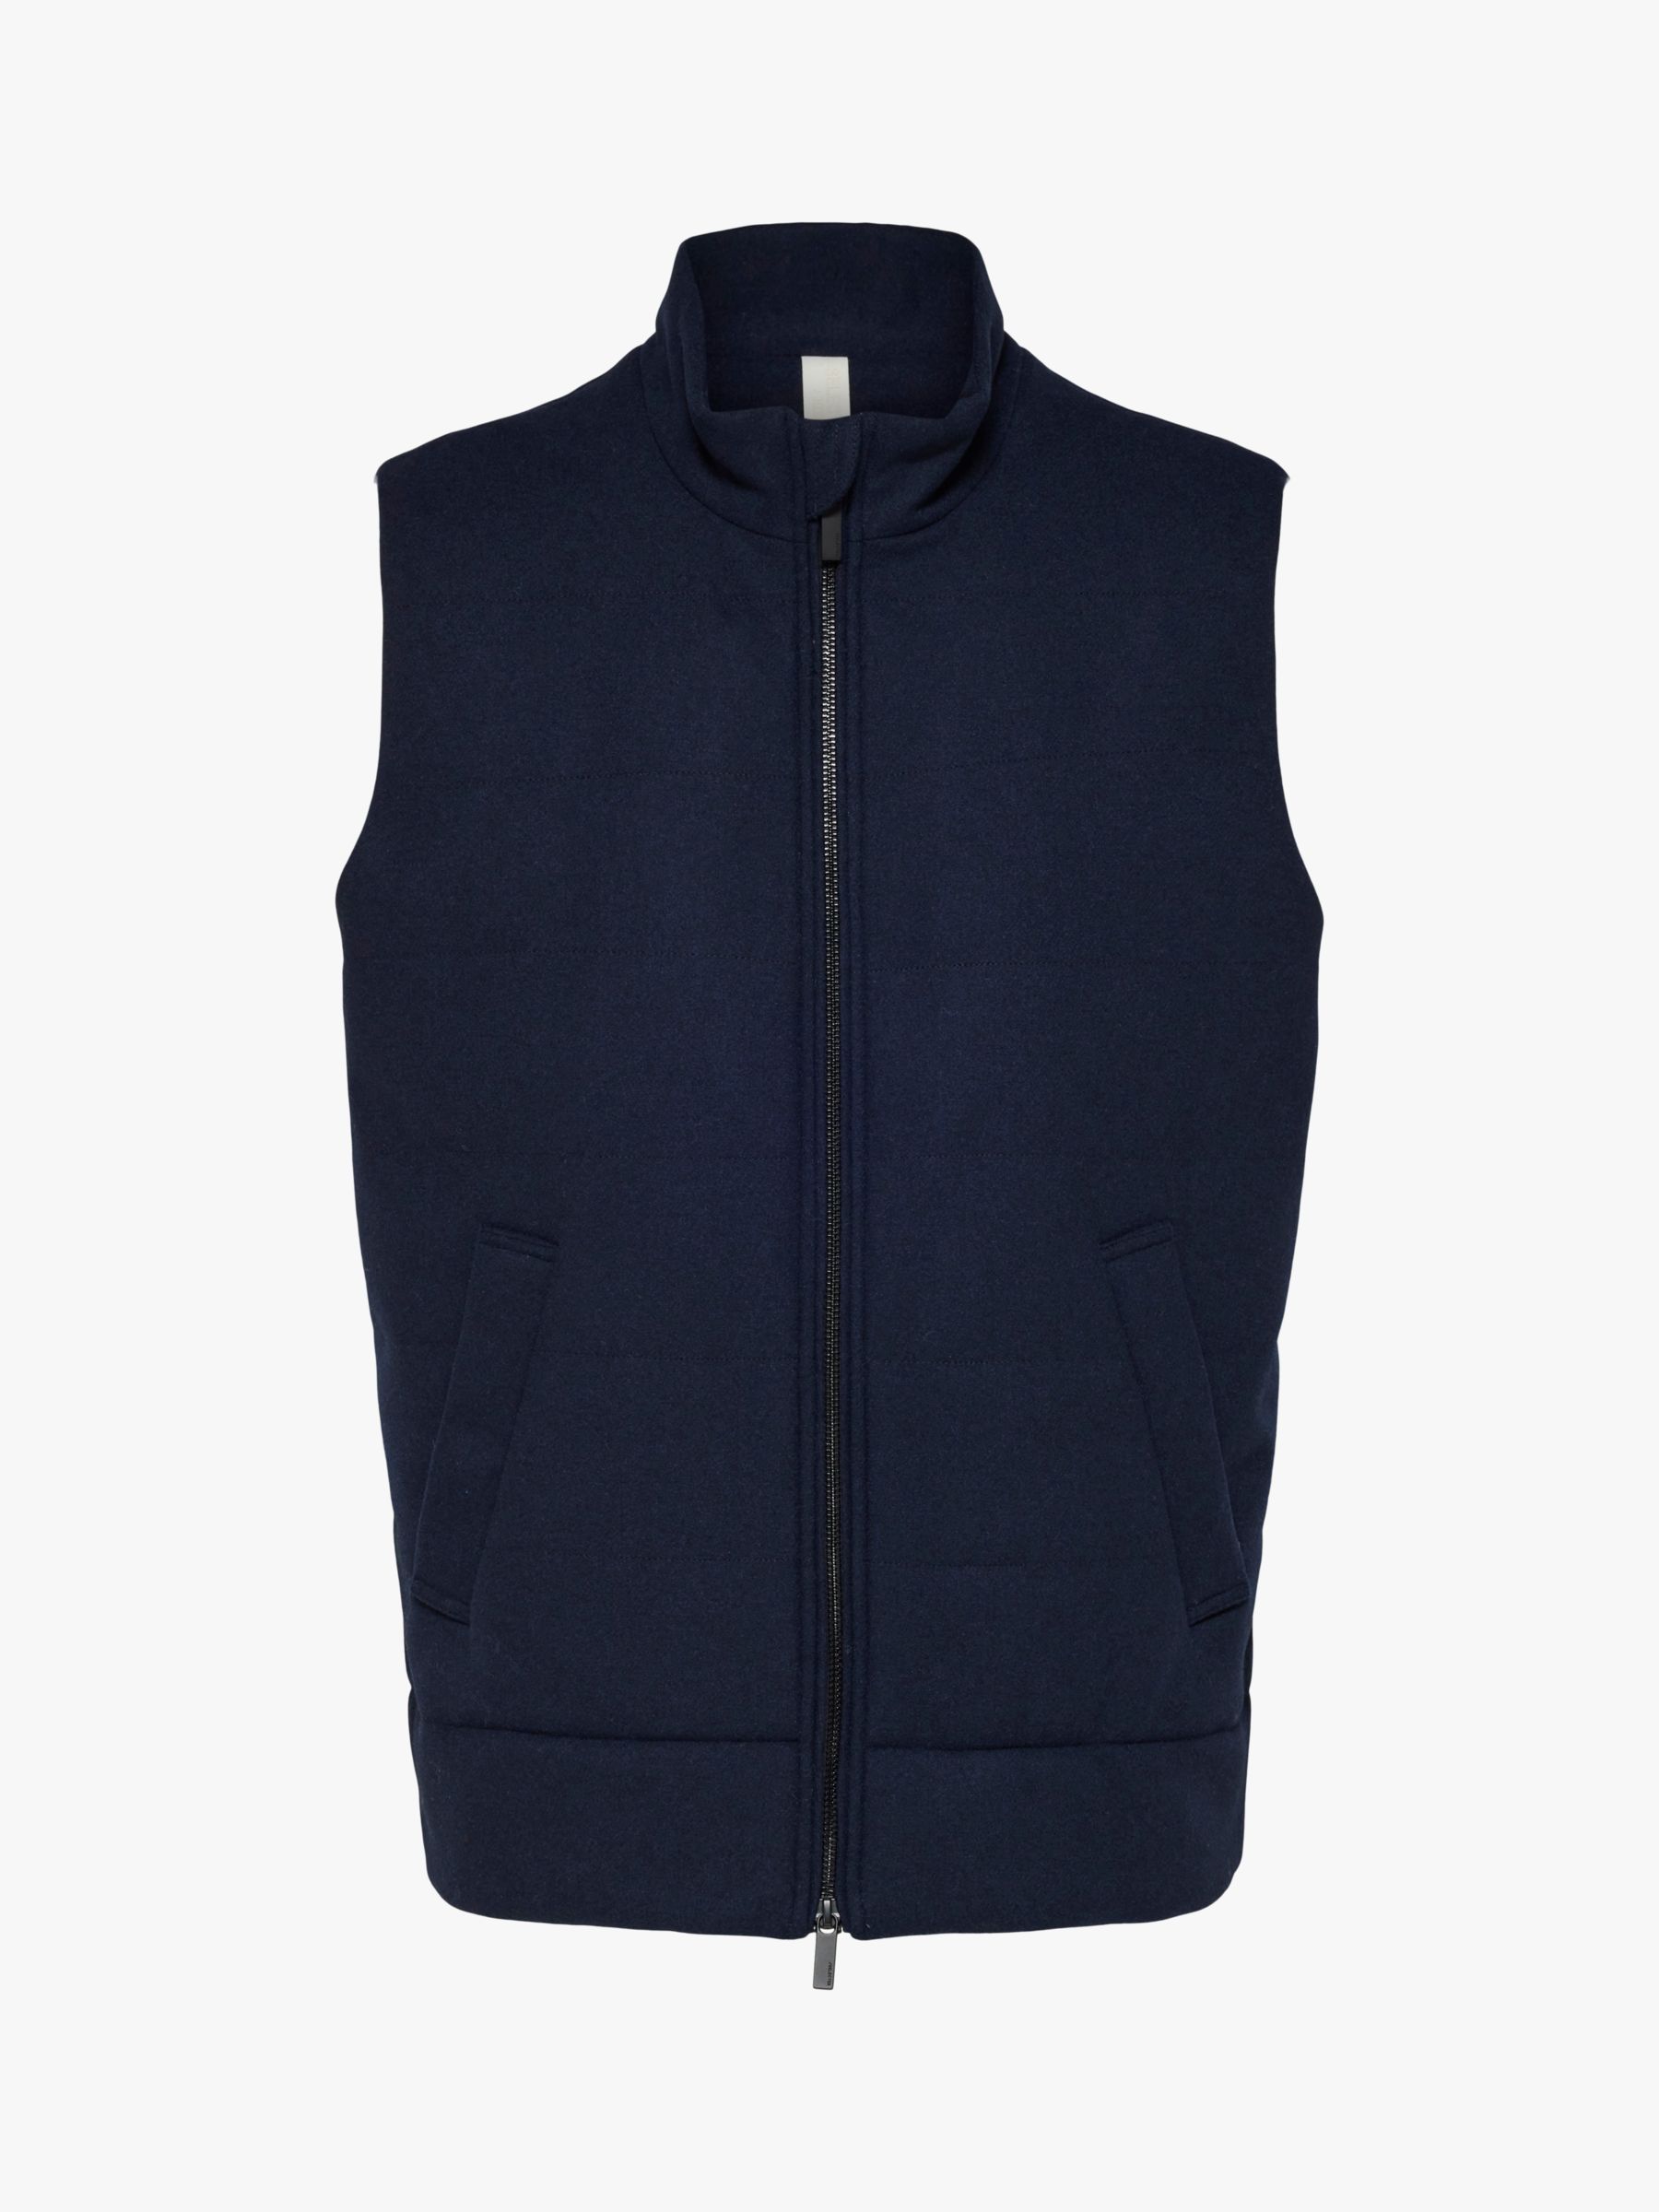 SELECTED HOMME Padded Gilet, Navy, M